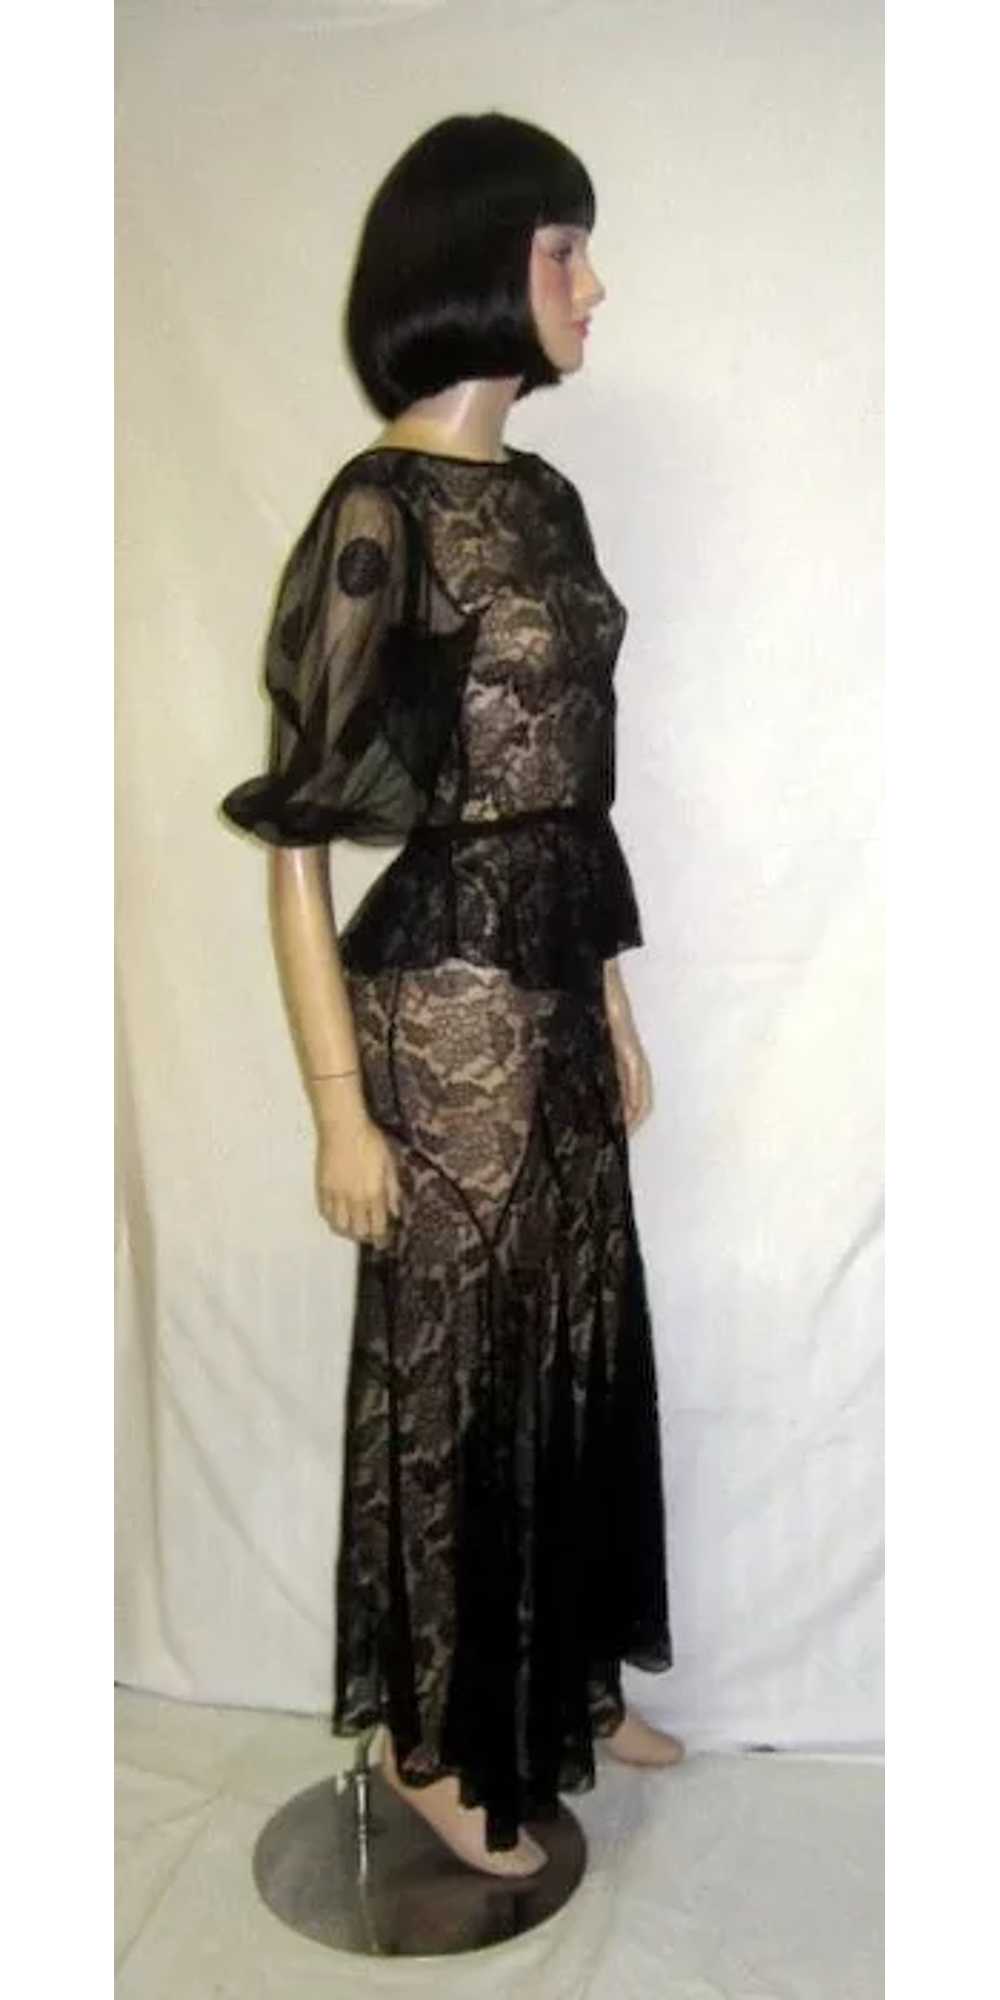 Sensual 1930's Black Lace Evening Gown - image 2